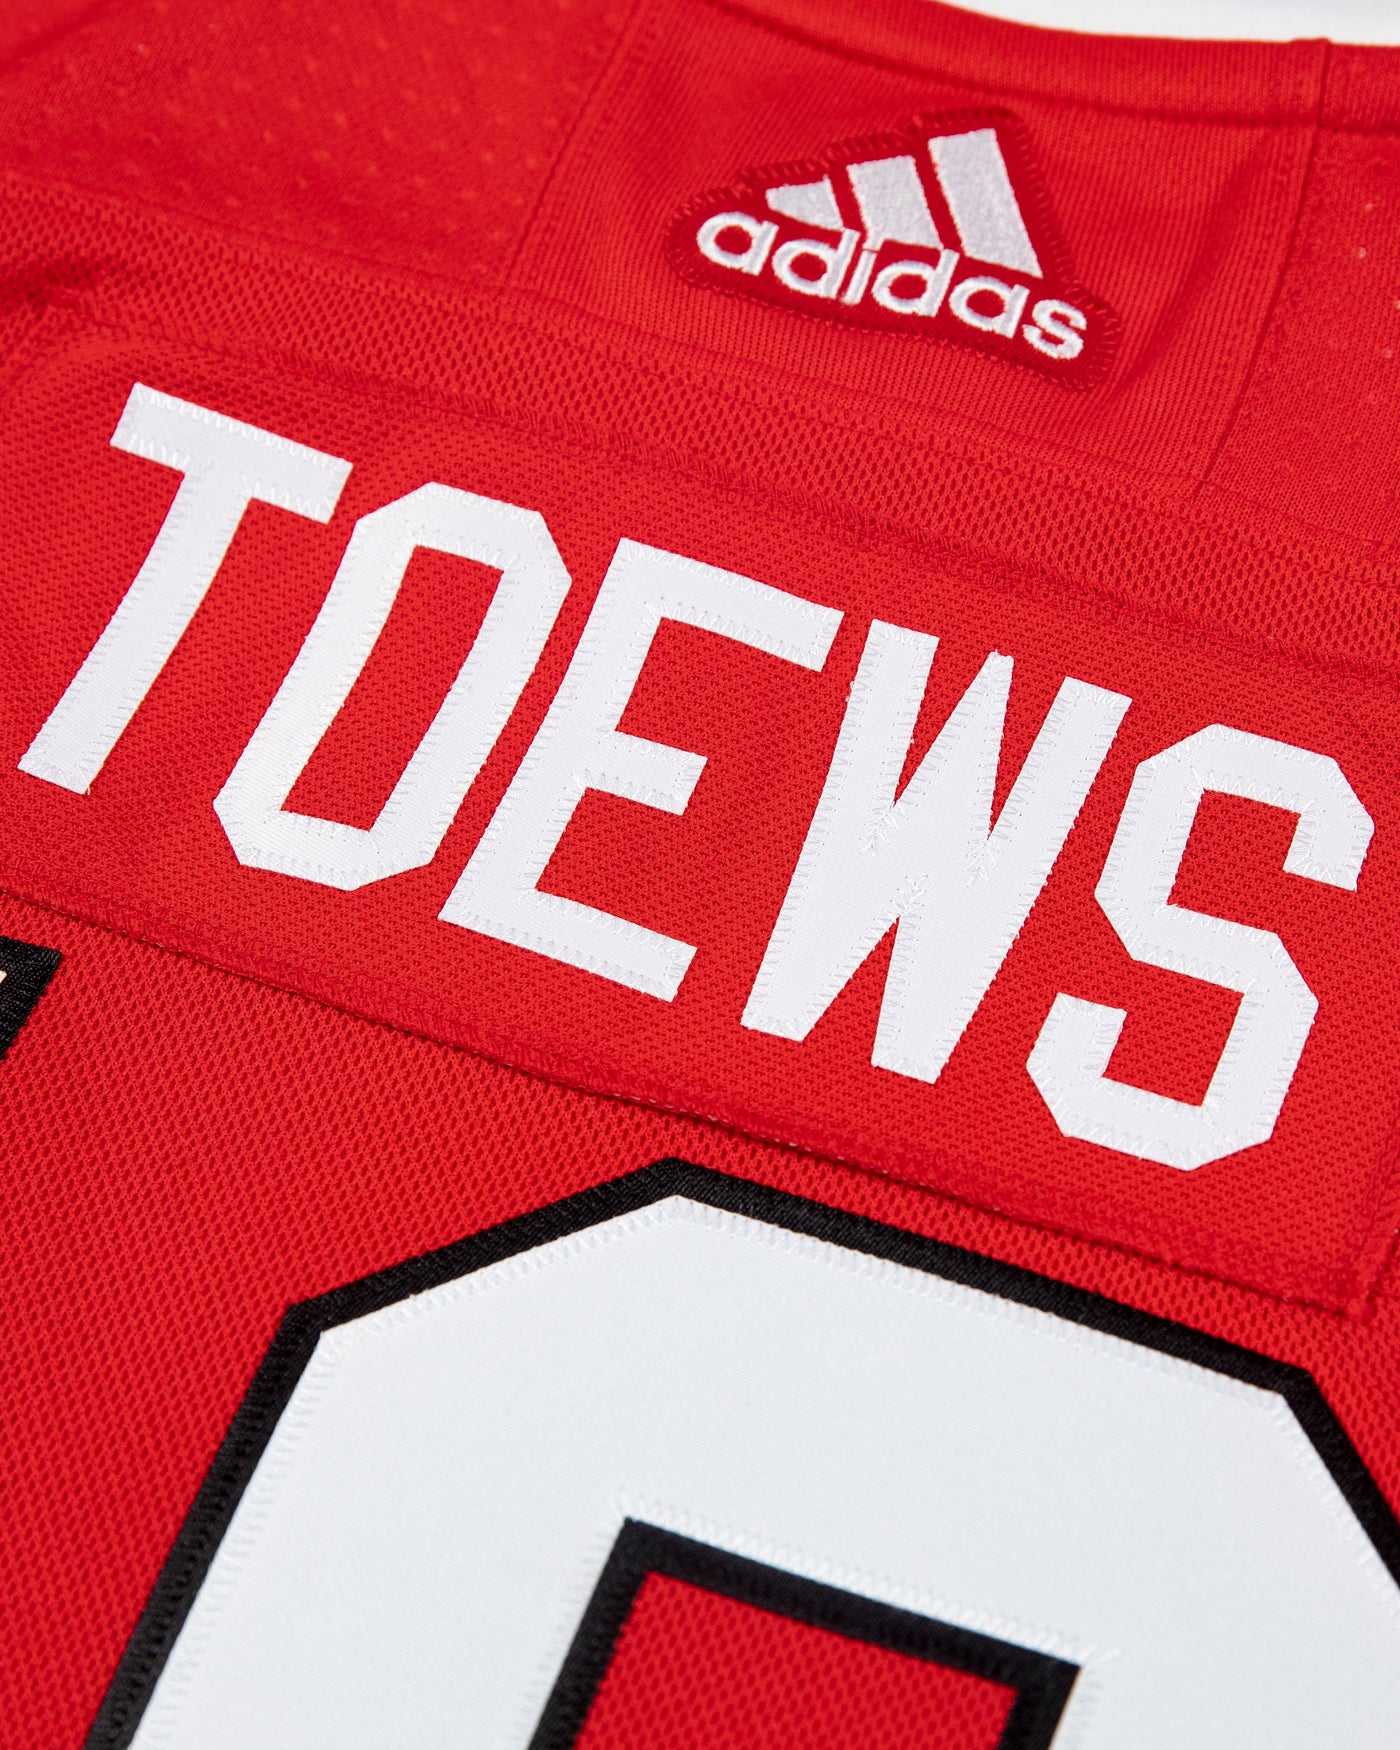 adidas authentic red home Toews 19 Chicago Blackhawks jersey - detail Toews lay flat